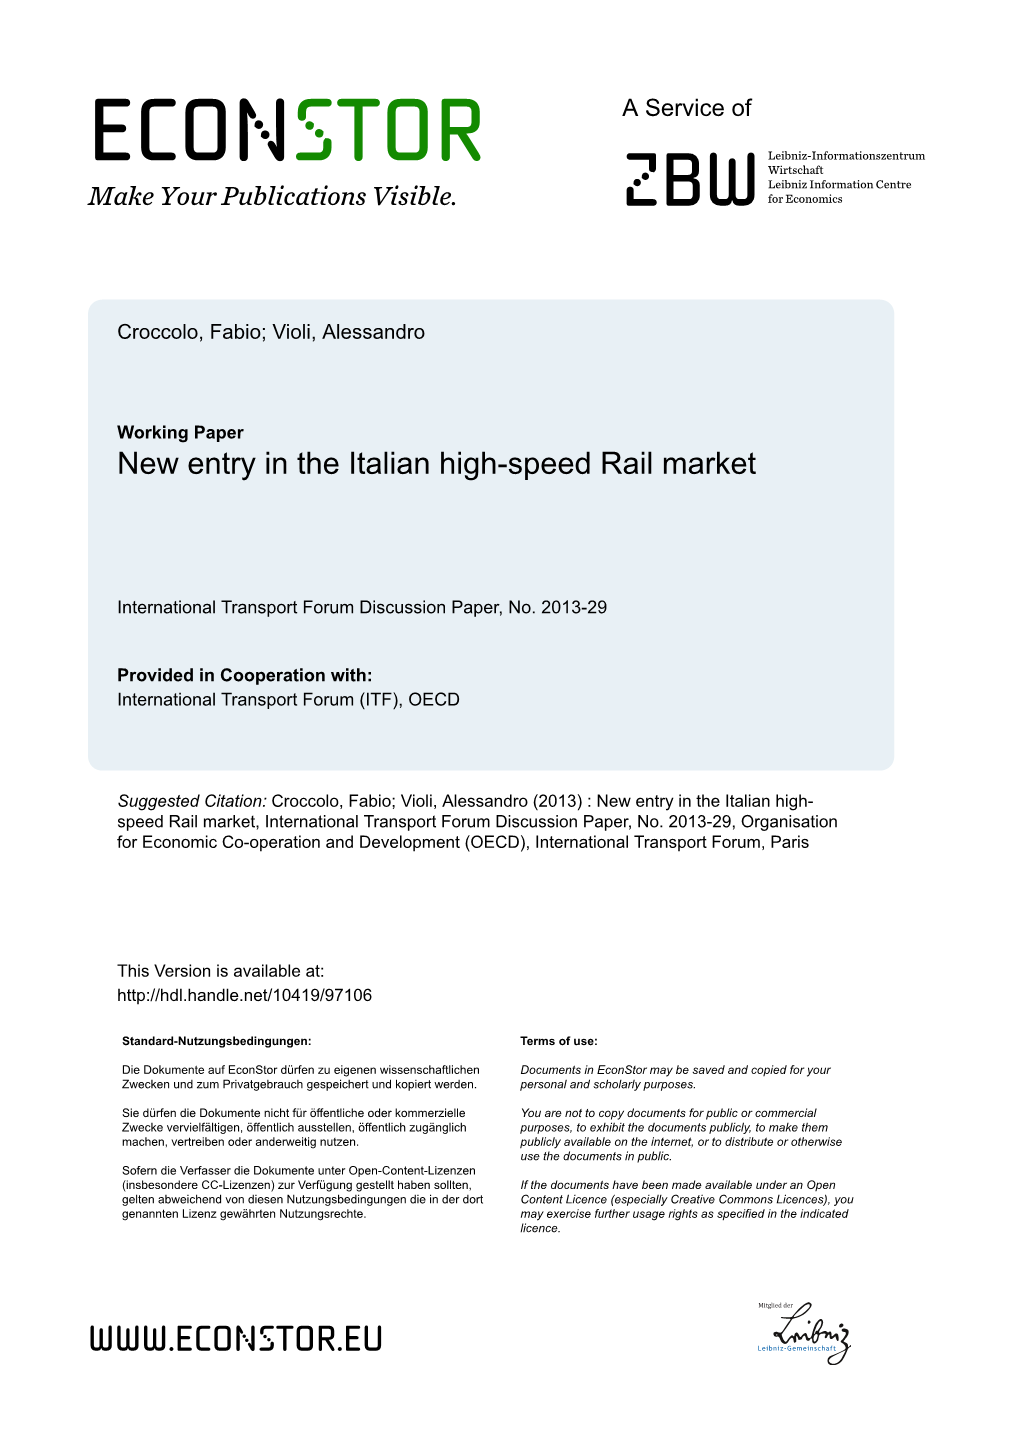 New Entry in the Italian High-Speed Rail Market